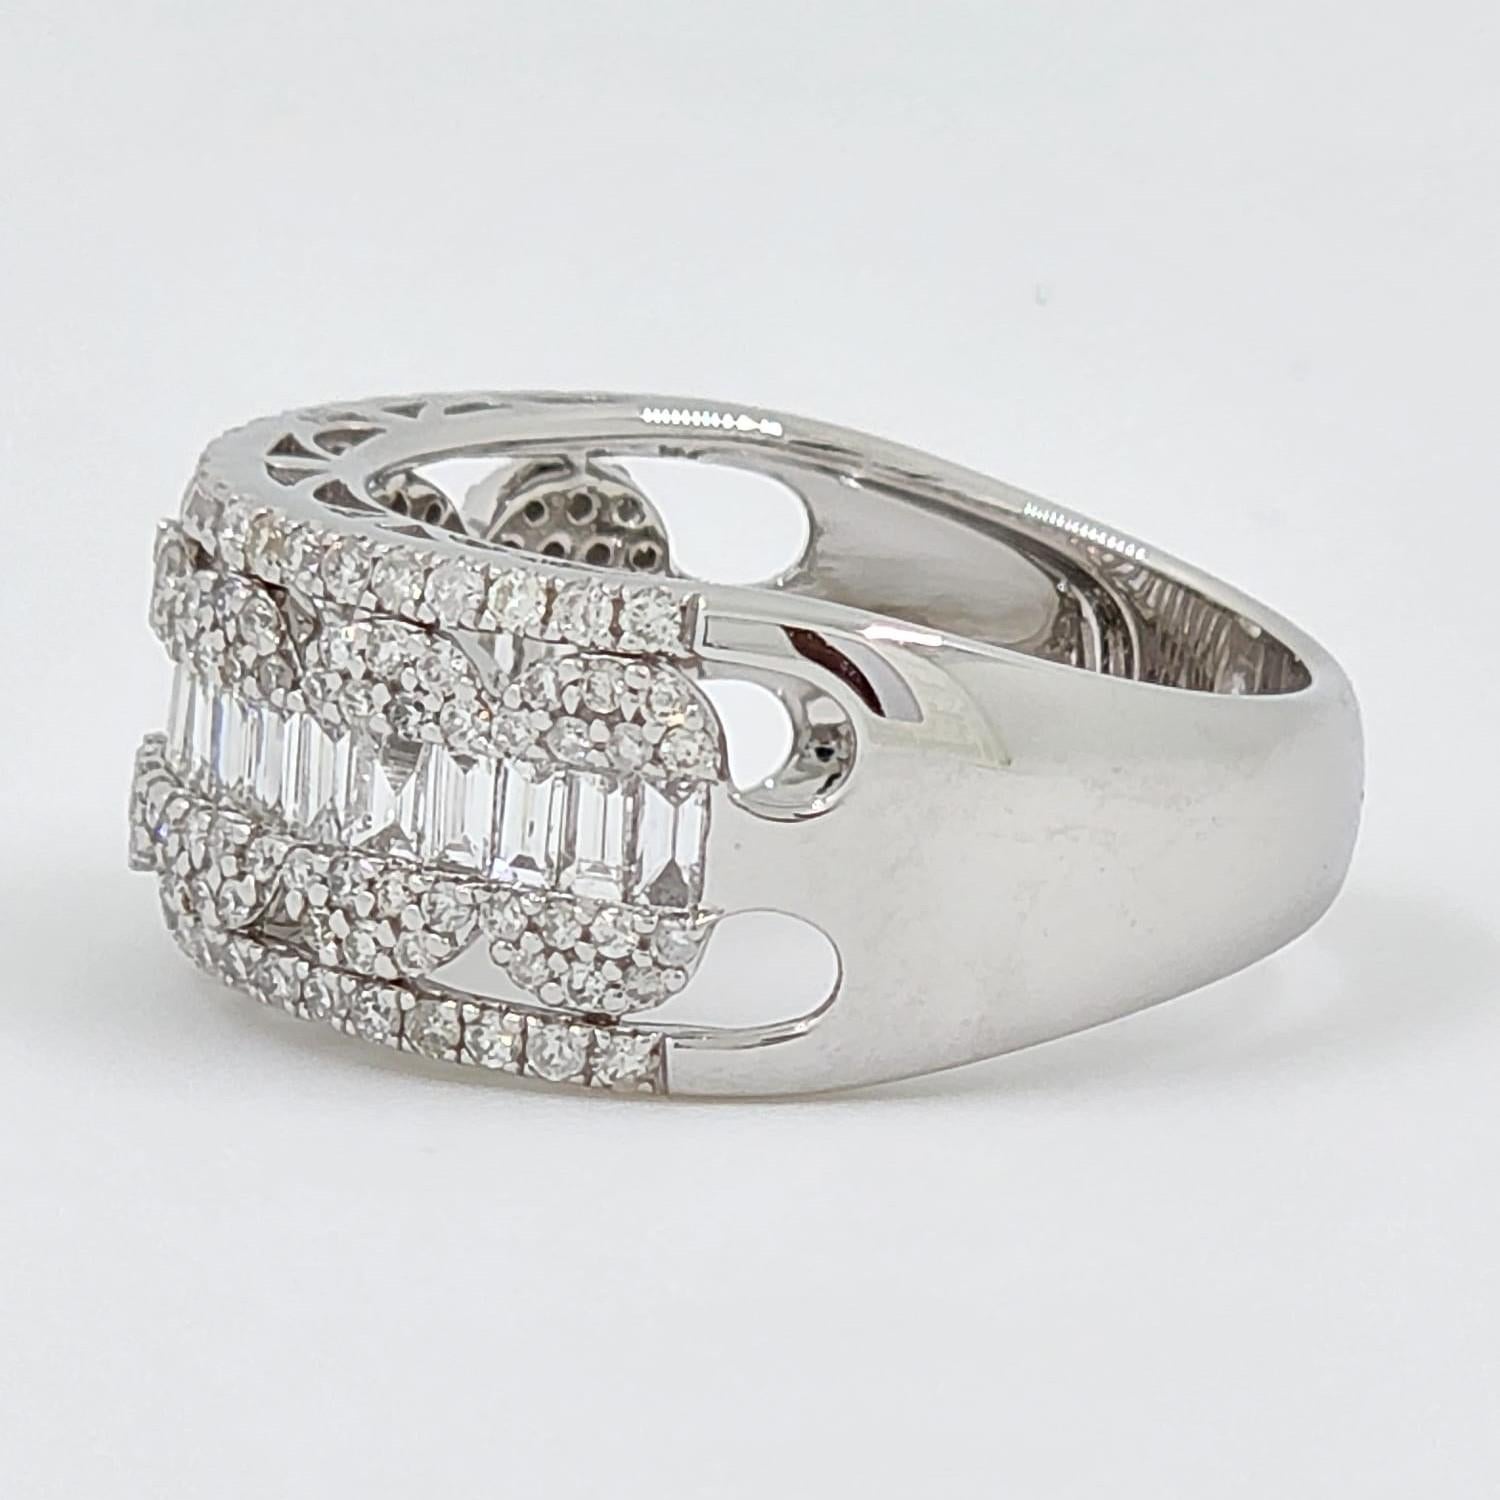 Contemporary Baguette Round Diamond Band Ring in 18 Karat White Gold